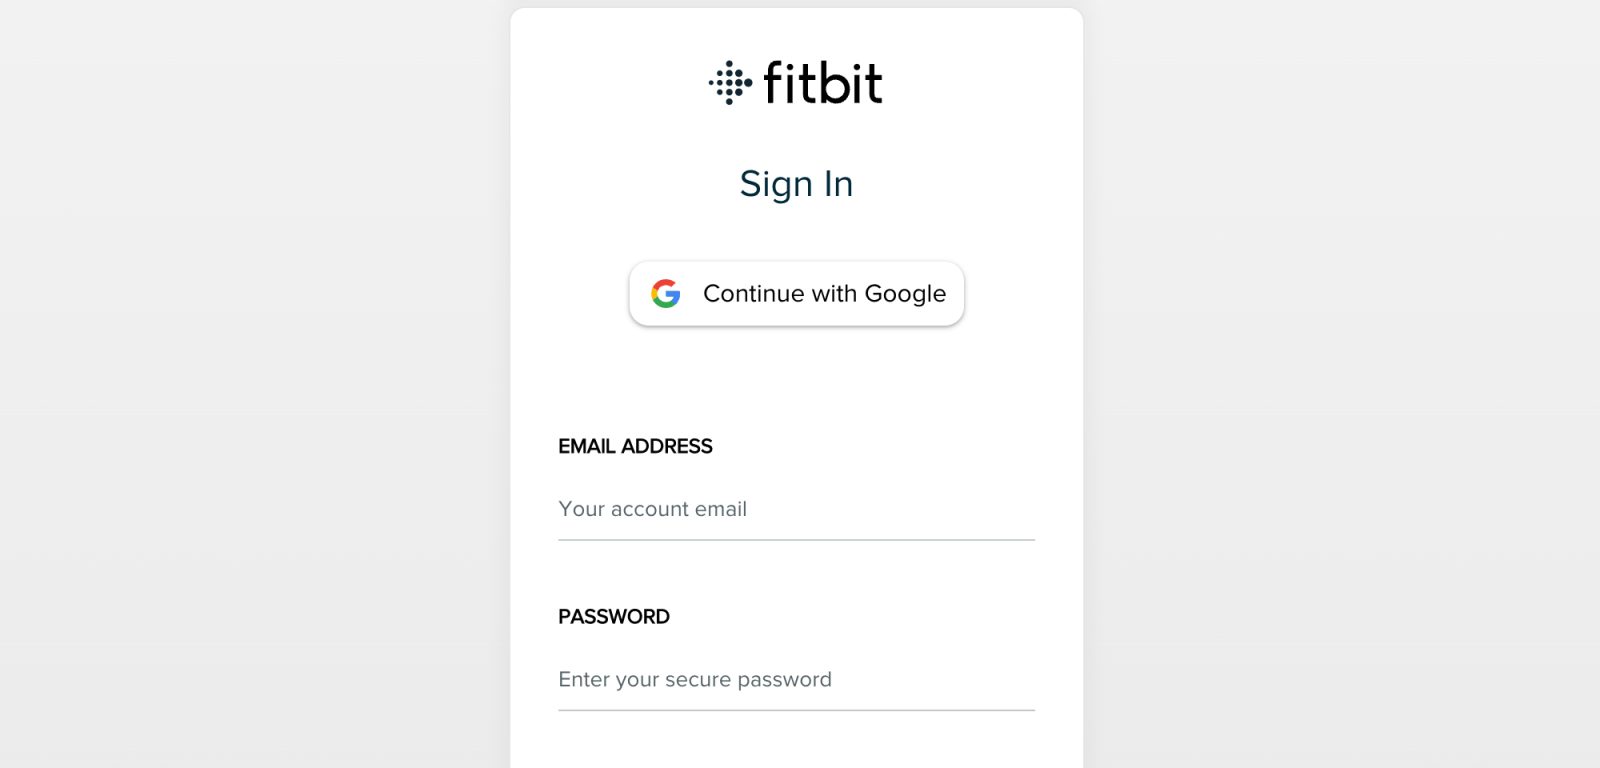 Modig symaskine svag Fitbit removing Google sign-in support ahead of account transition